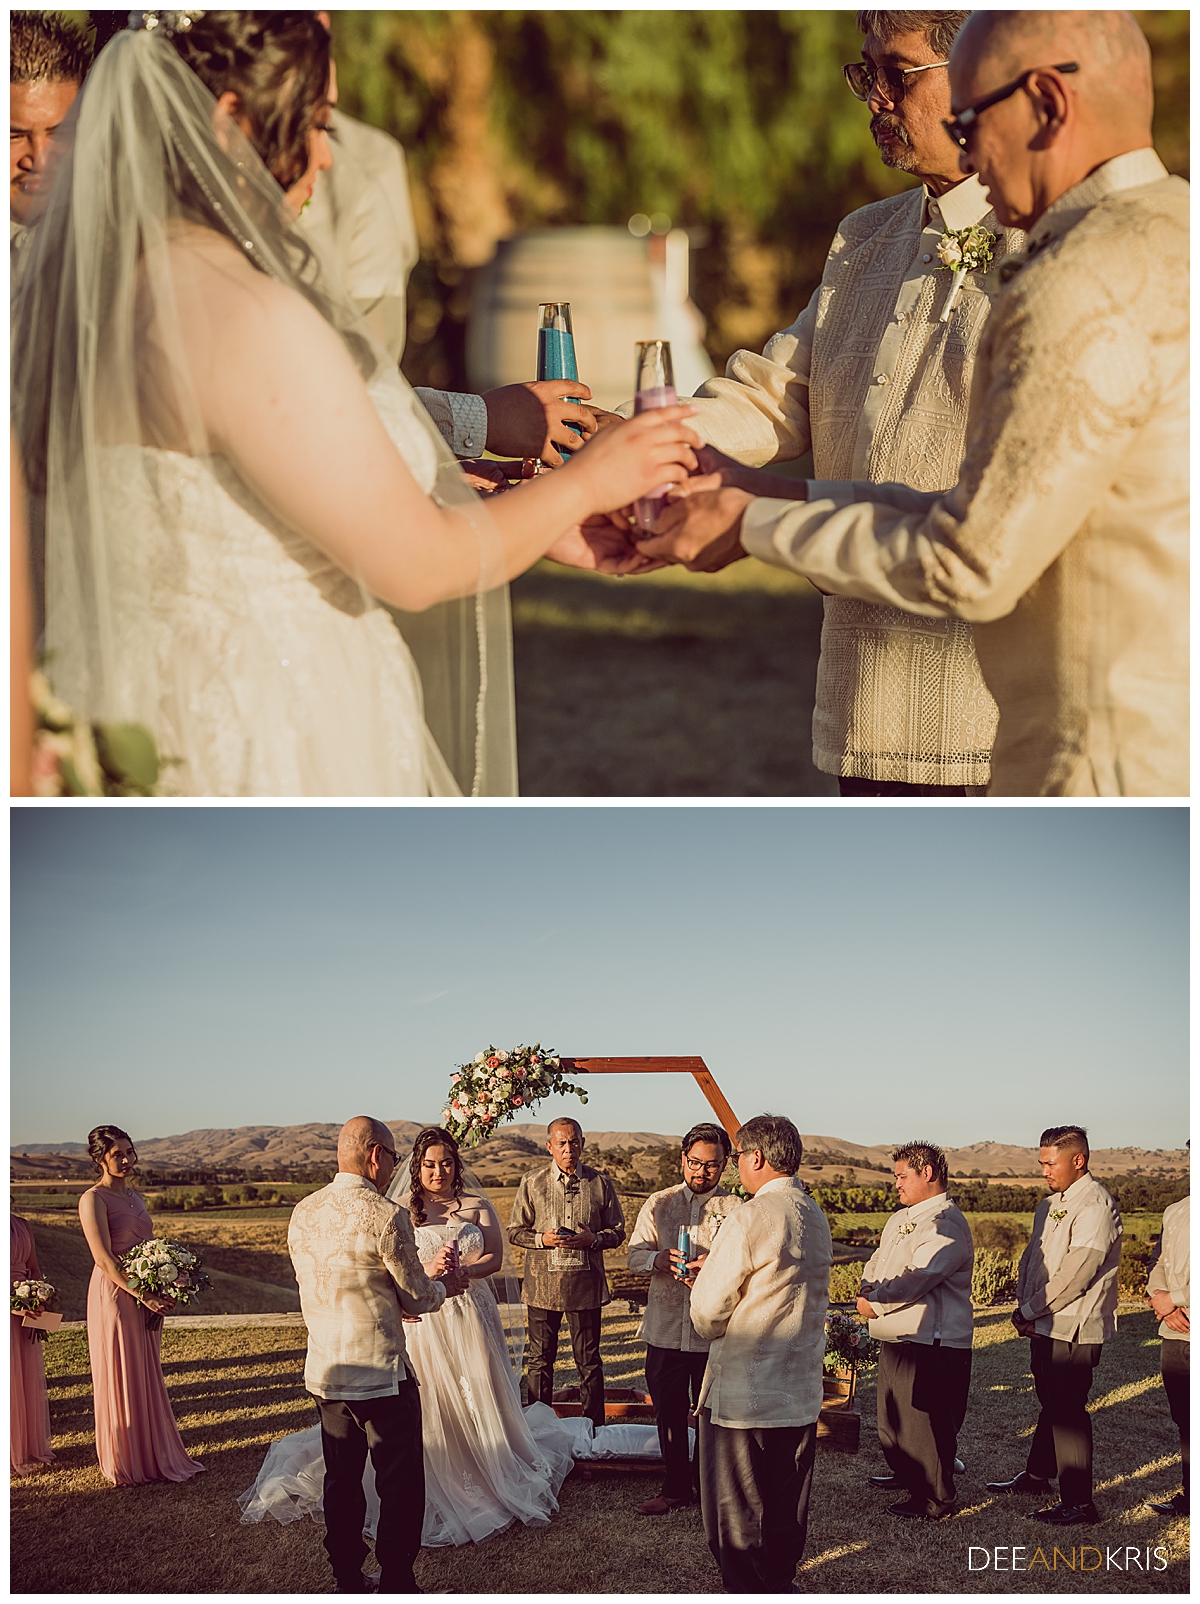 Two images of sand ceremony.